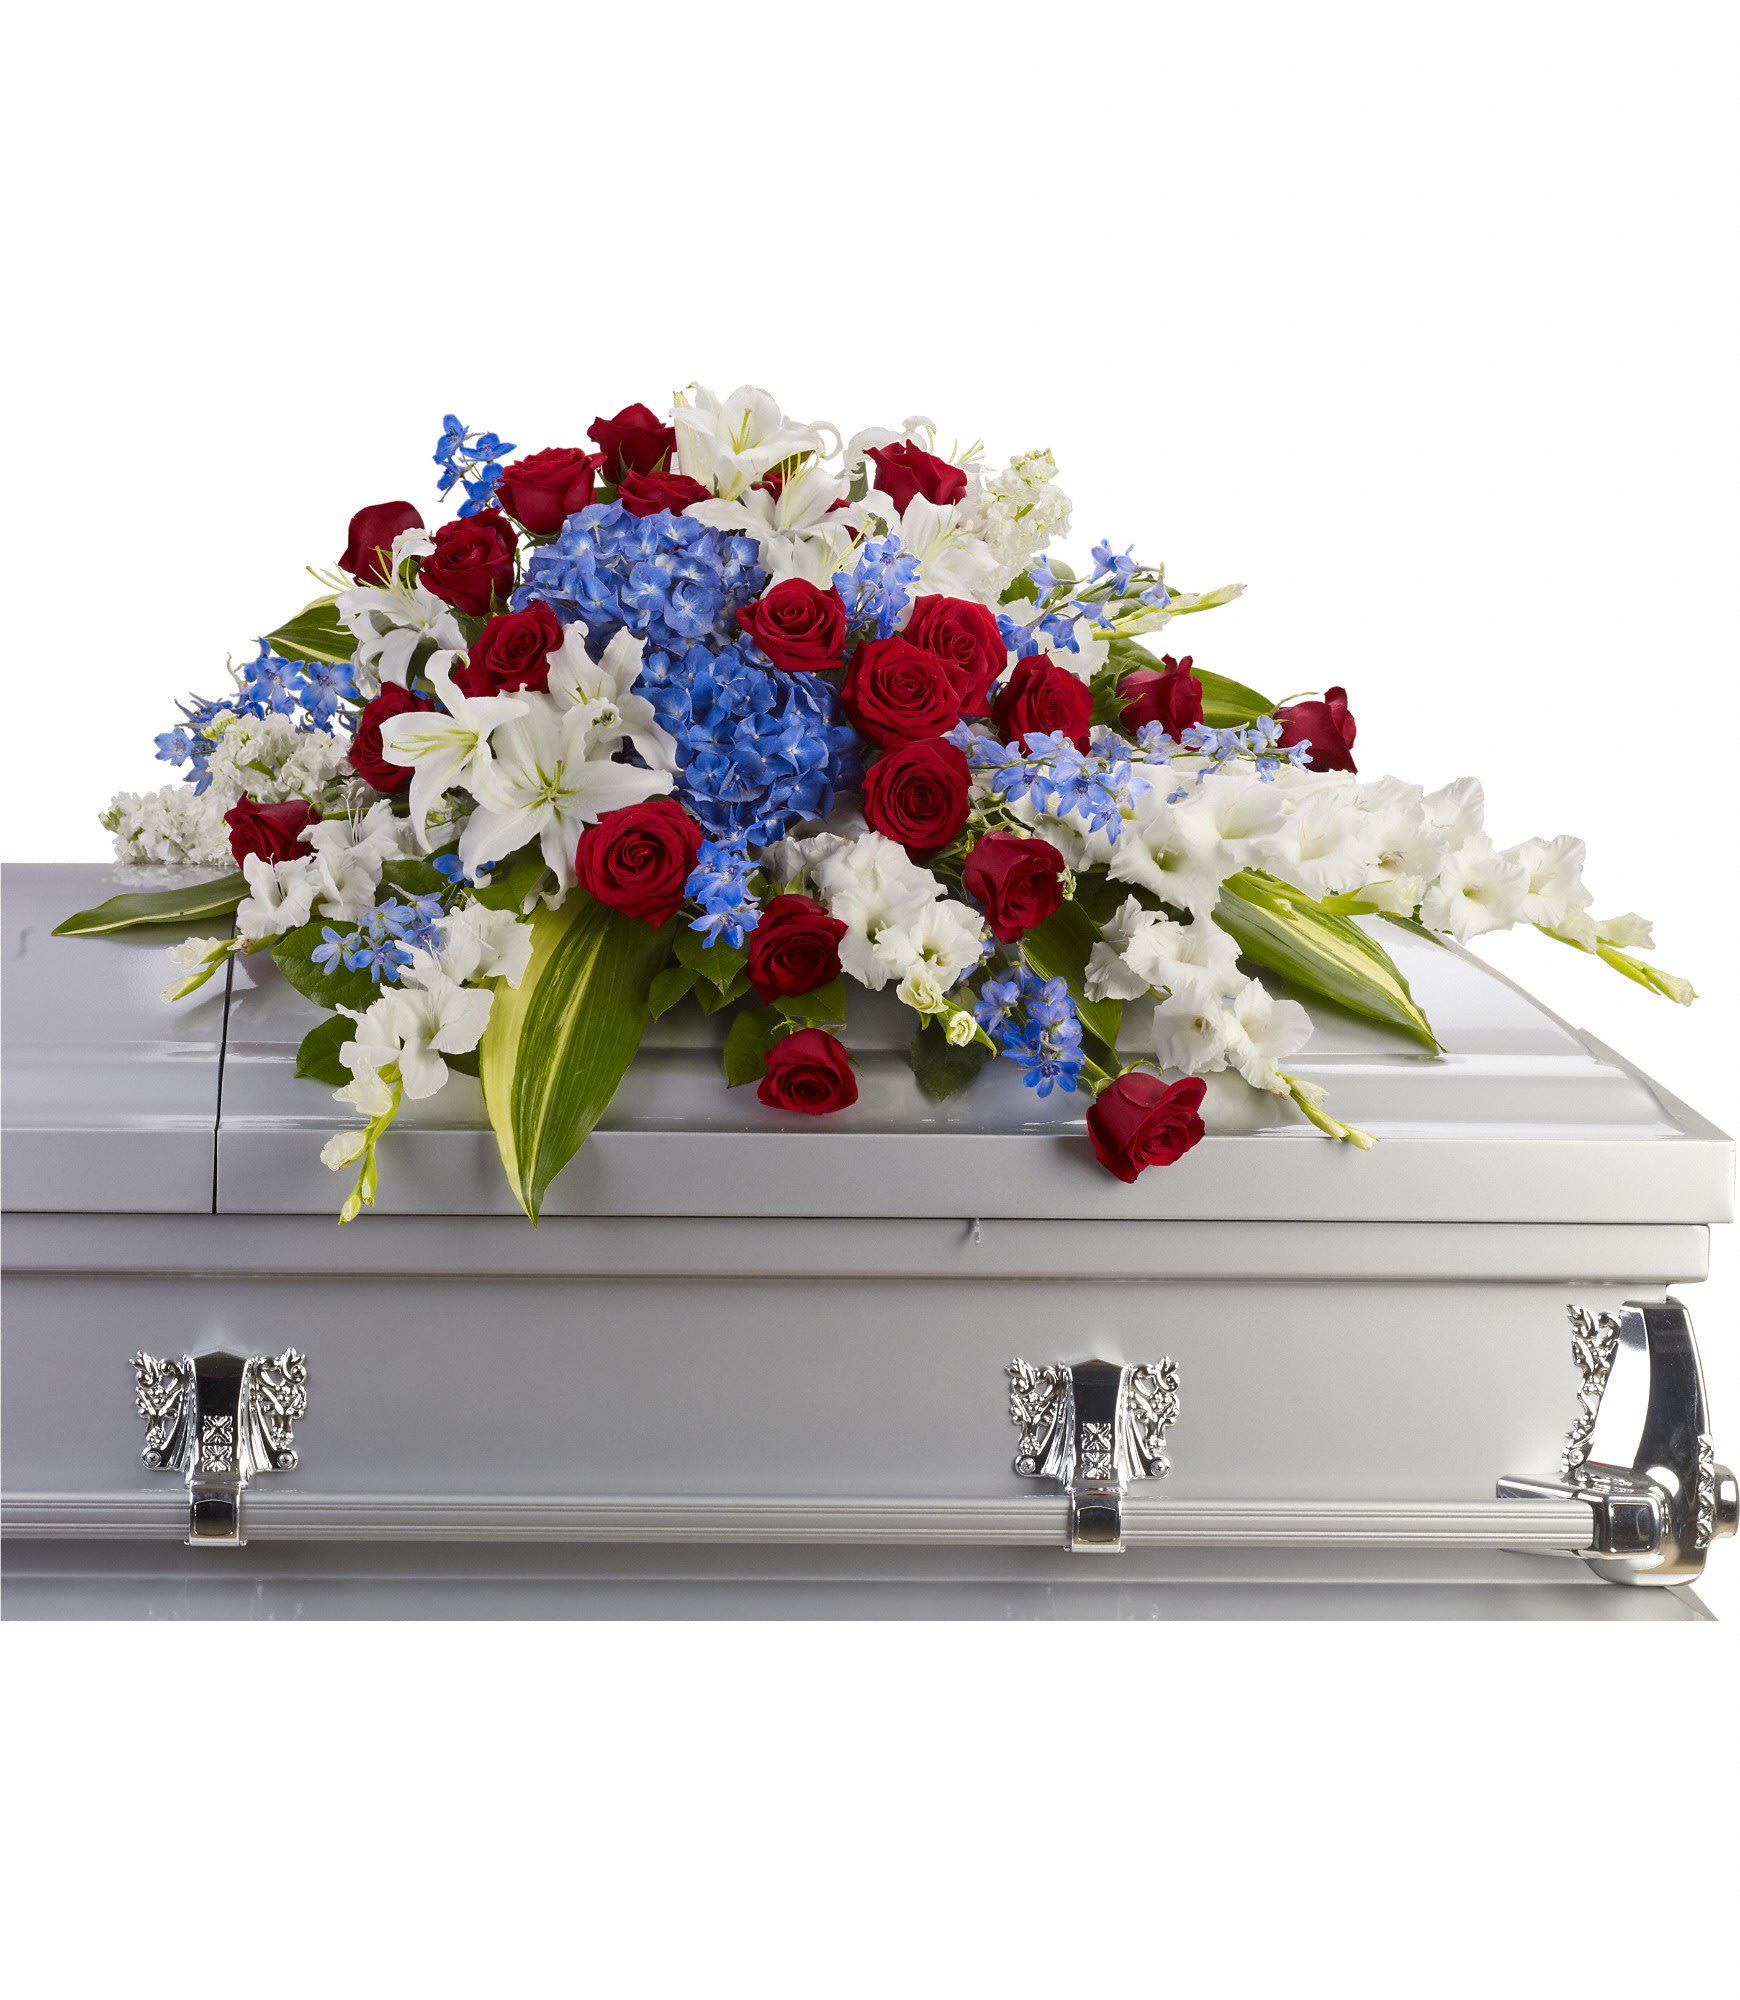 Distinguished Service Casket Spray by Teleflora - A beautifully patriotic way to pay tribute to a loved one. This half-couch spray sends an eloquent message of strength, respect and freedom. 